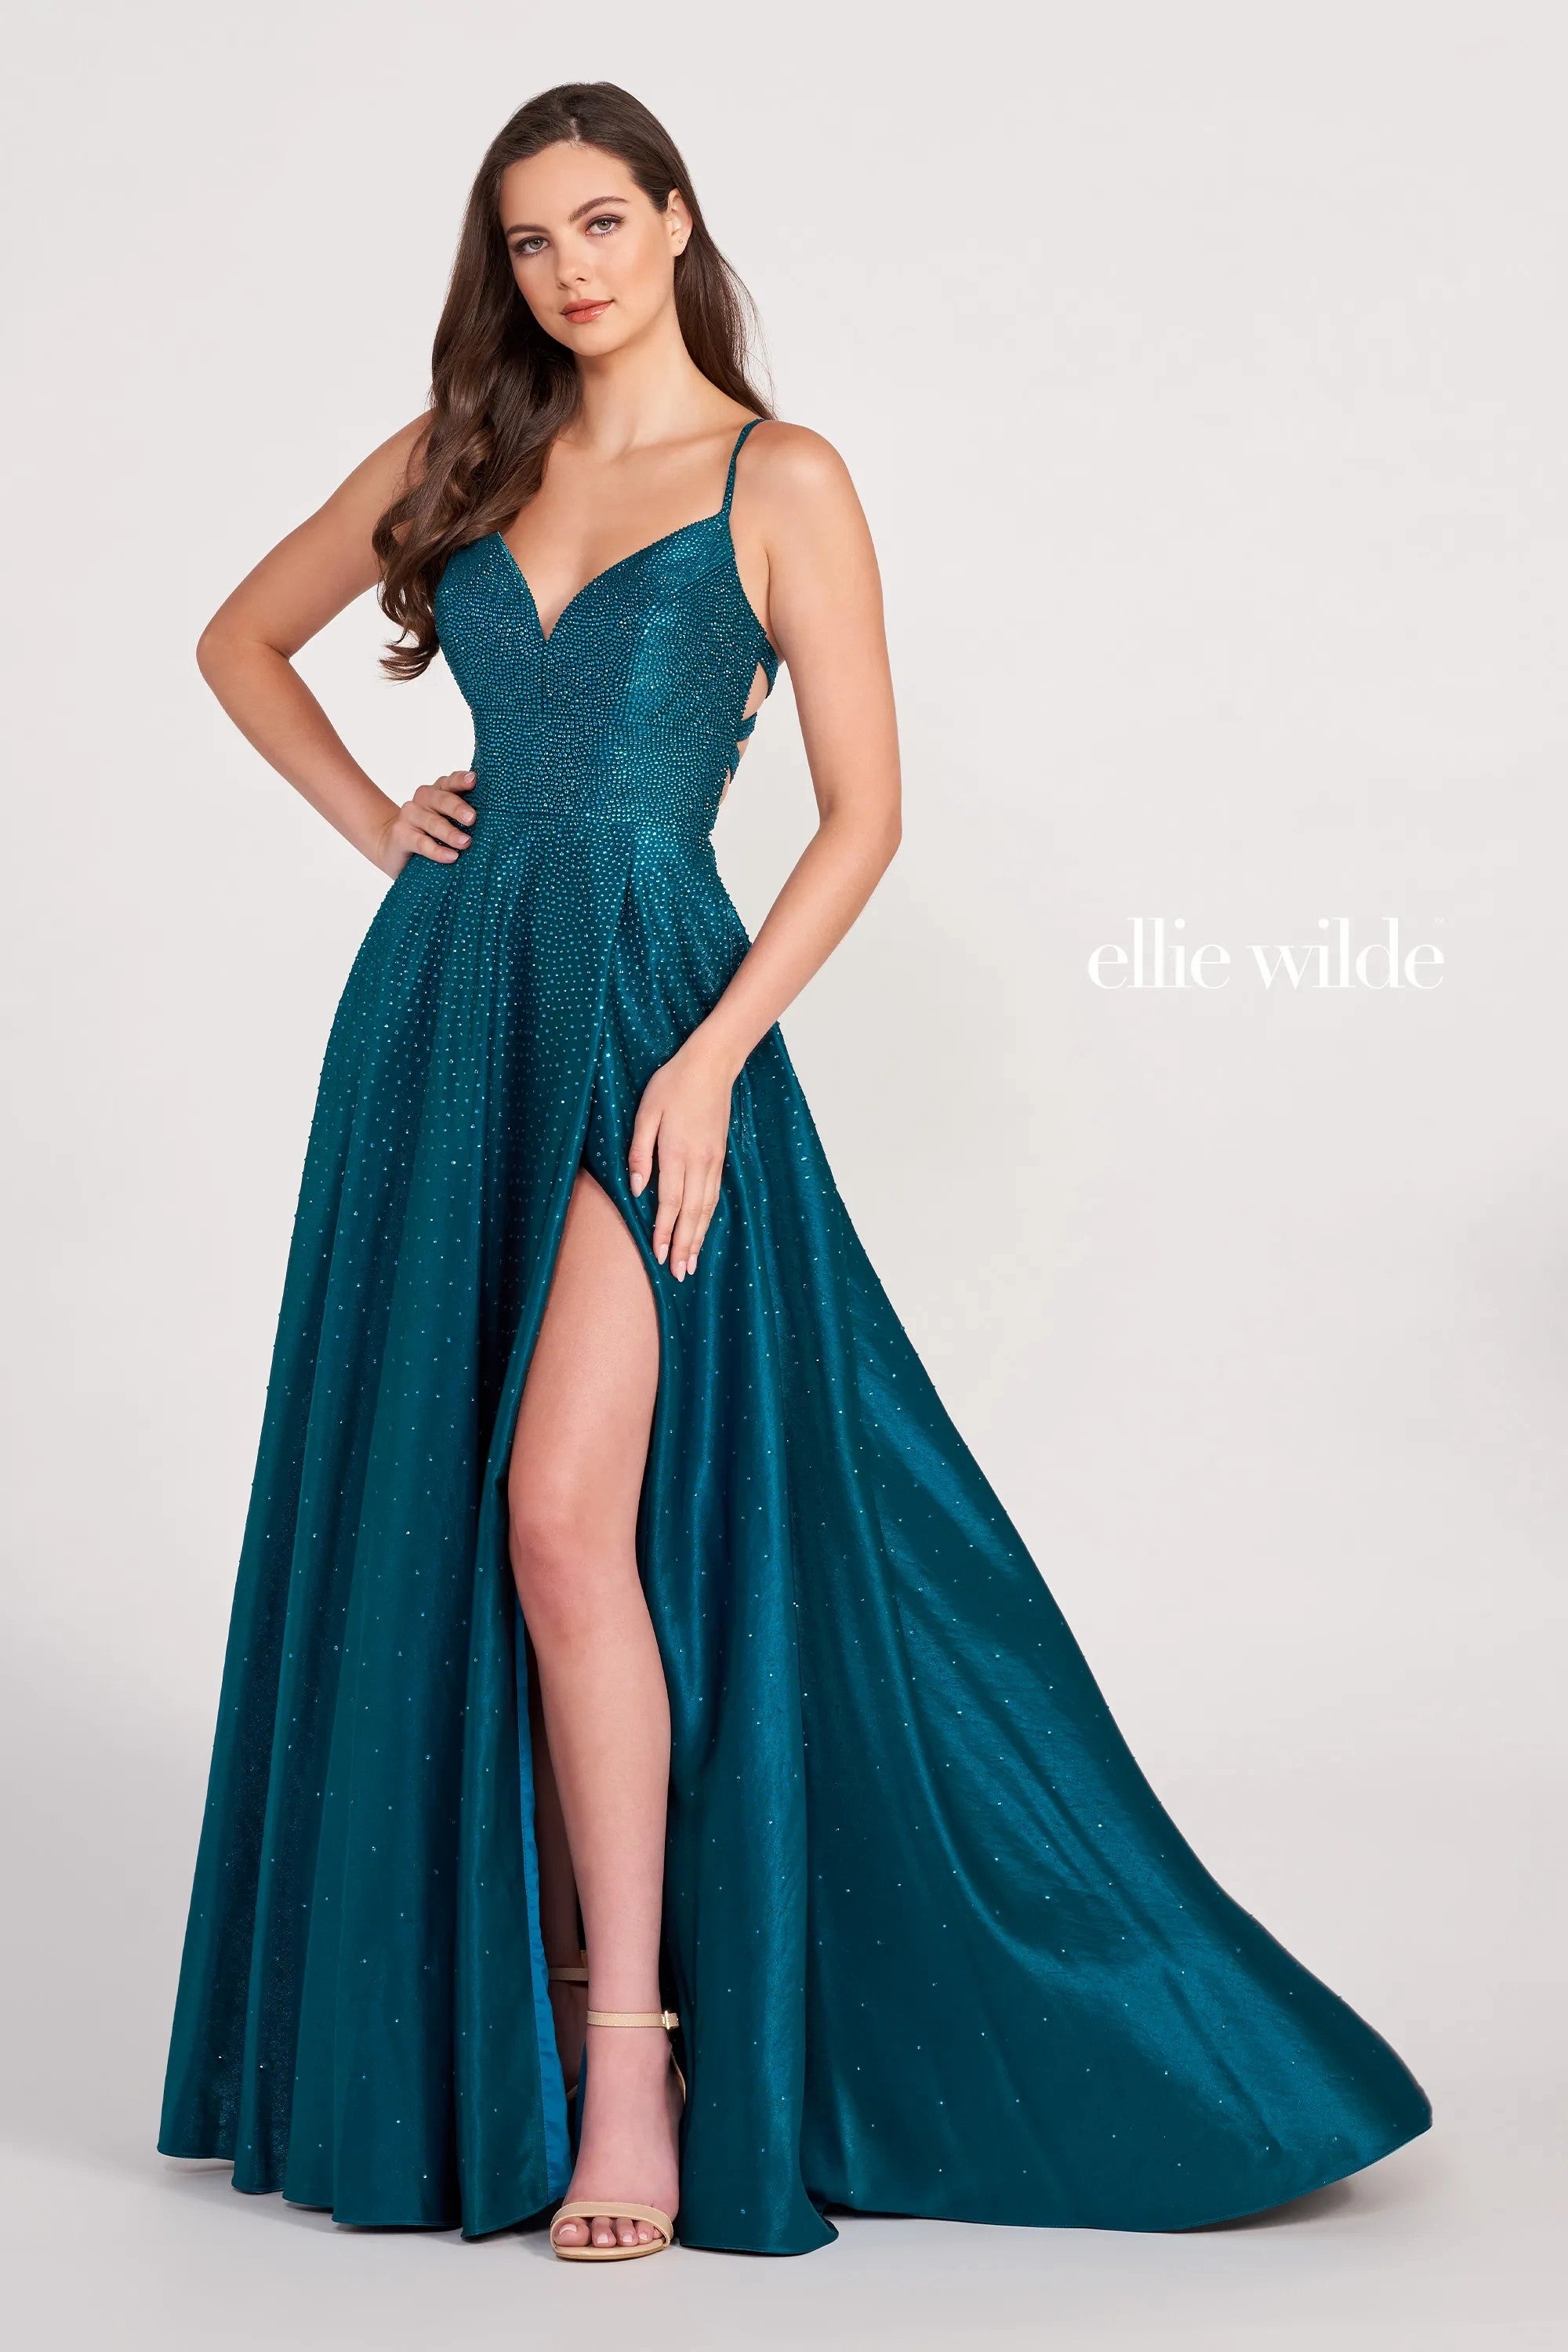 Prom Dresses Long Formal A Line Evening Prom Dress Teal